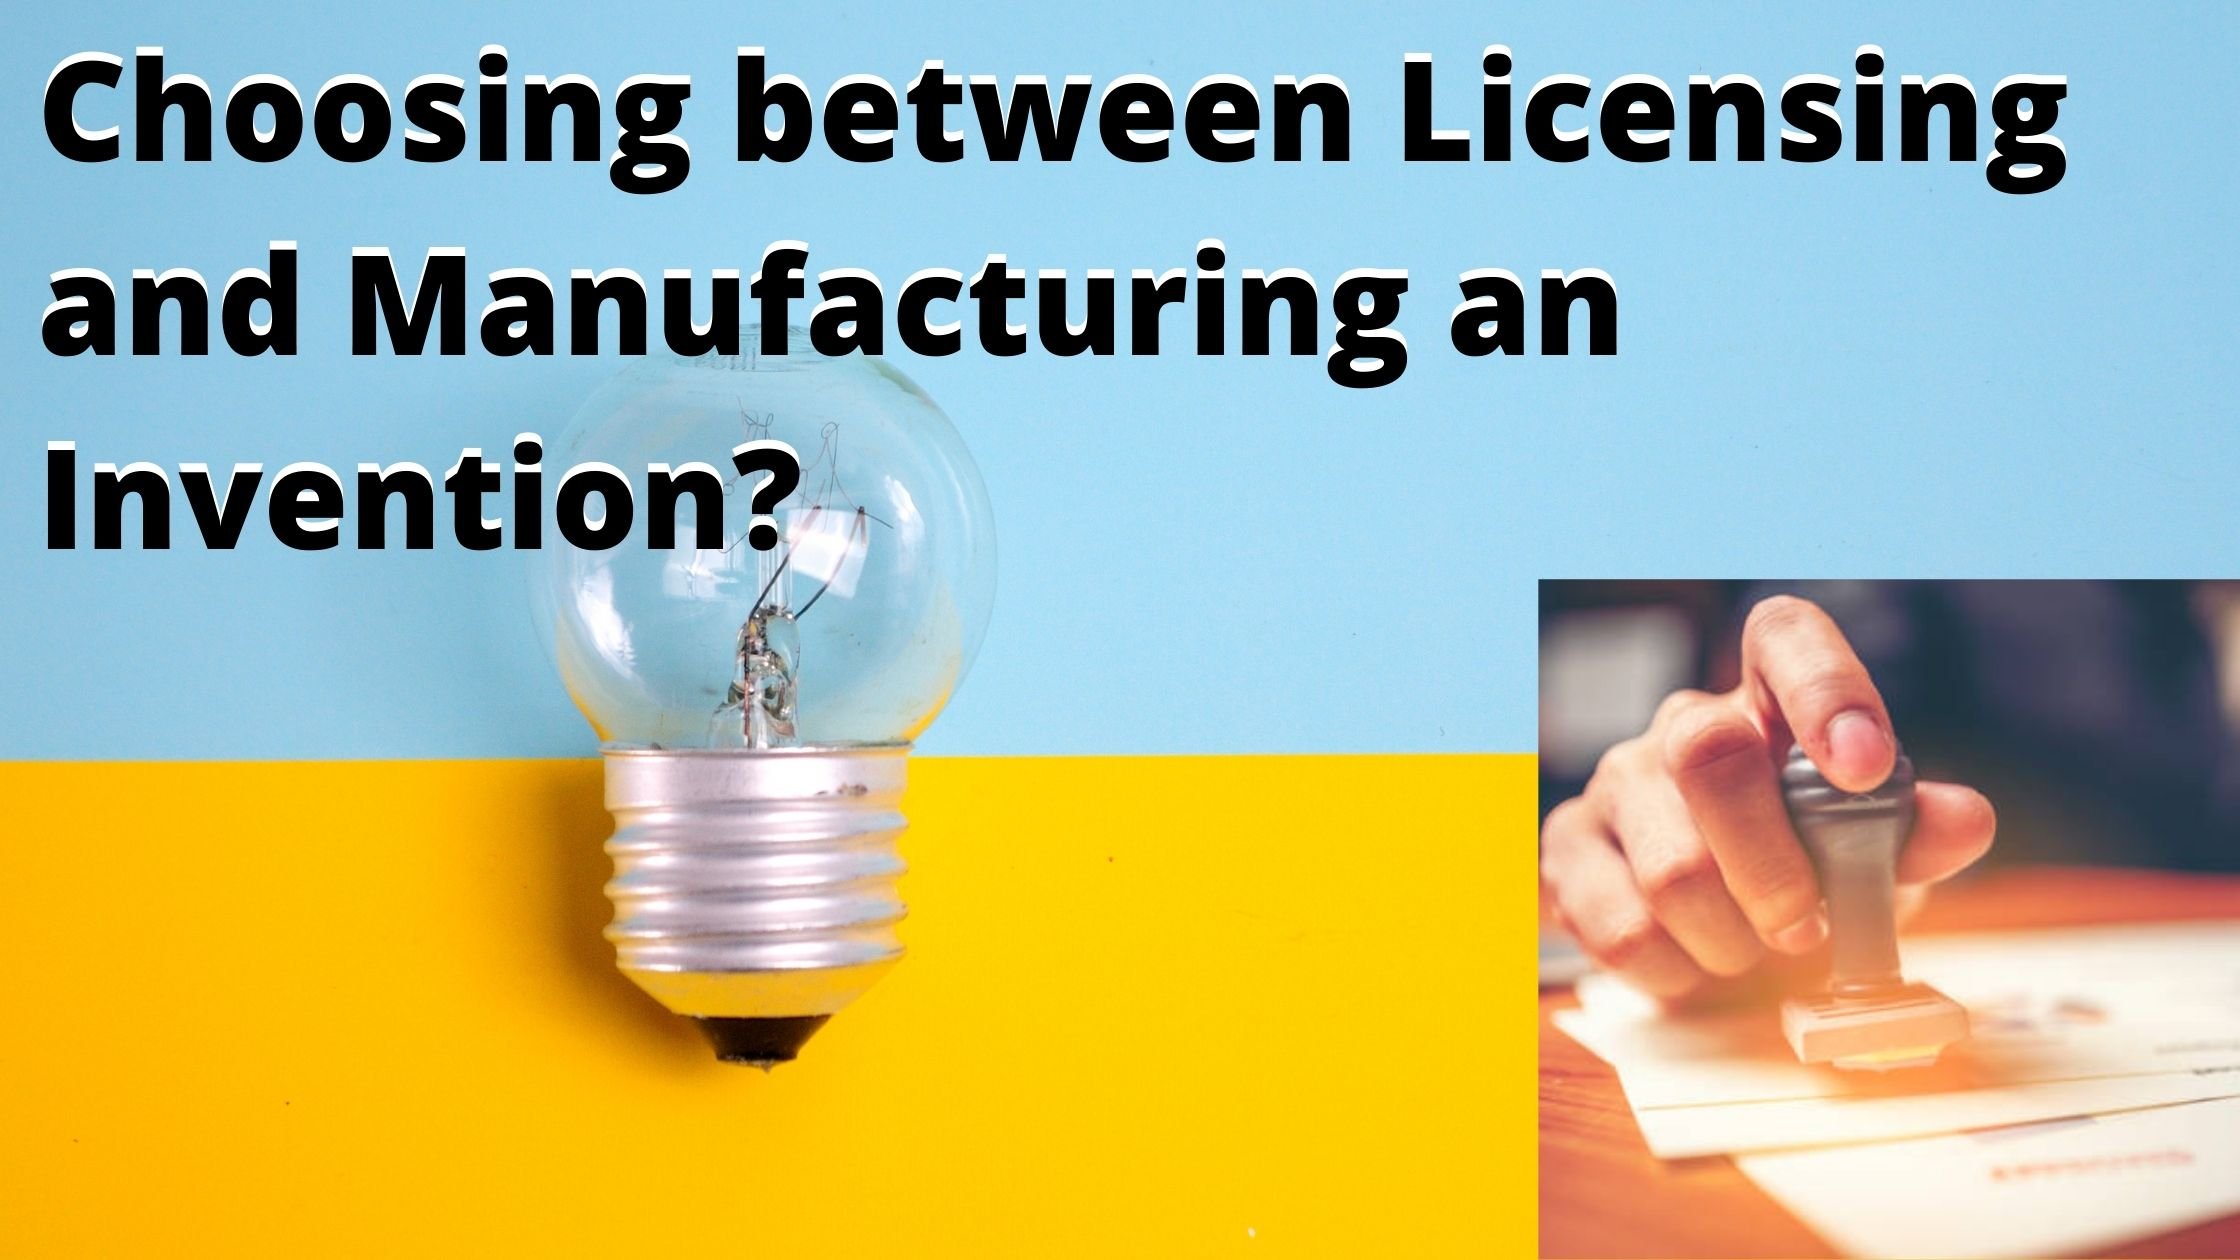 Choosing between Licensing and Manufacturing an Invention?